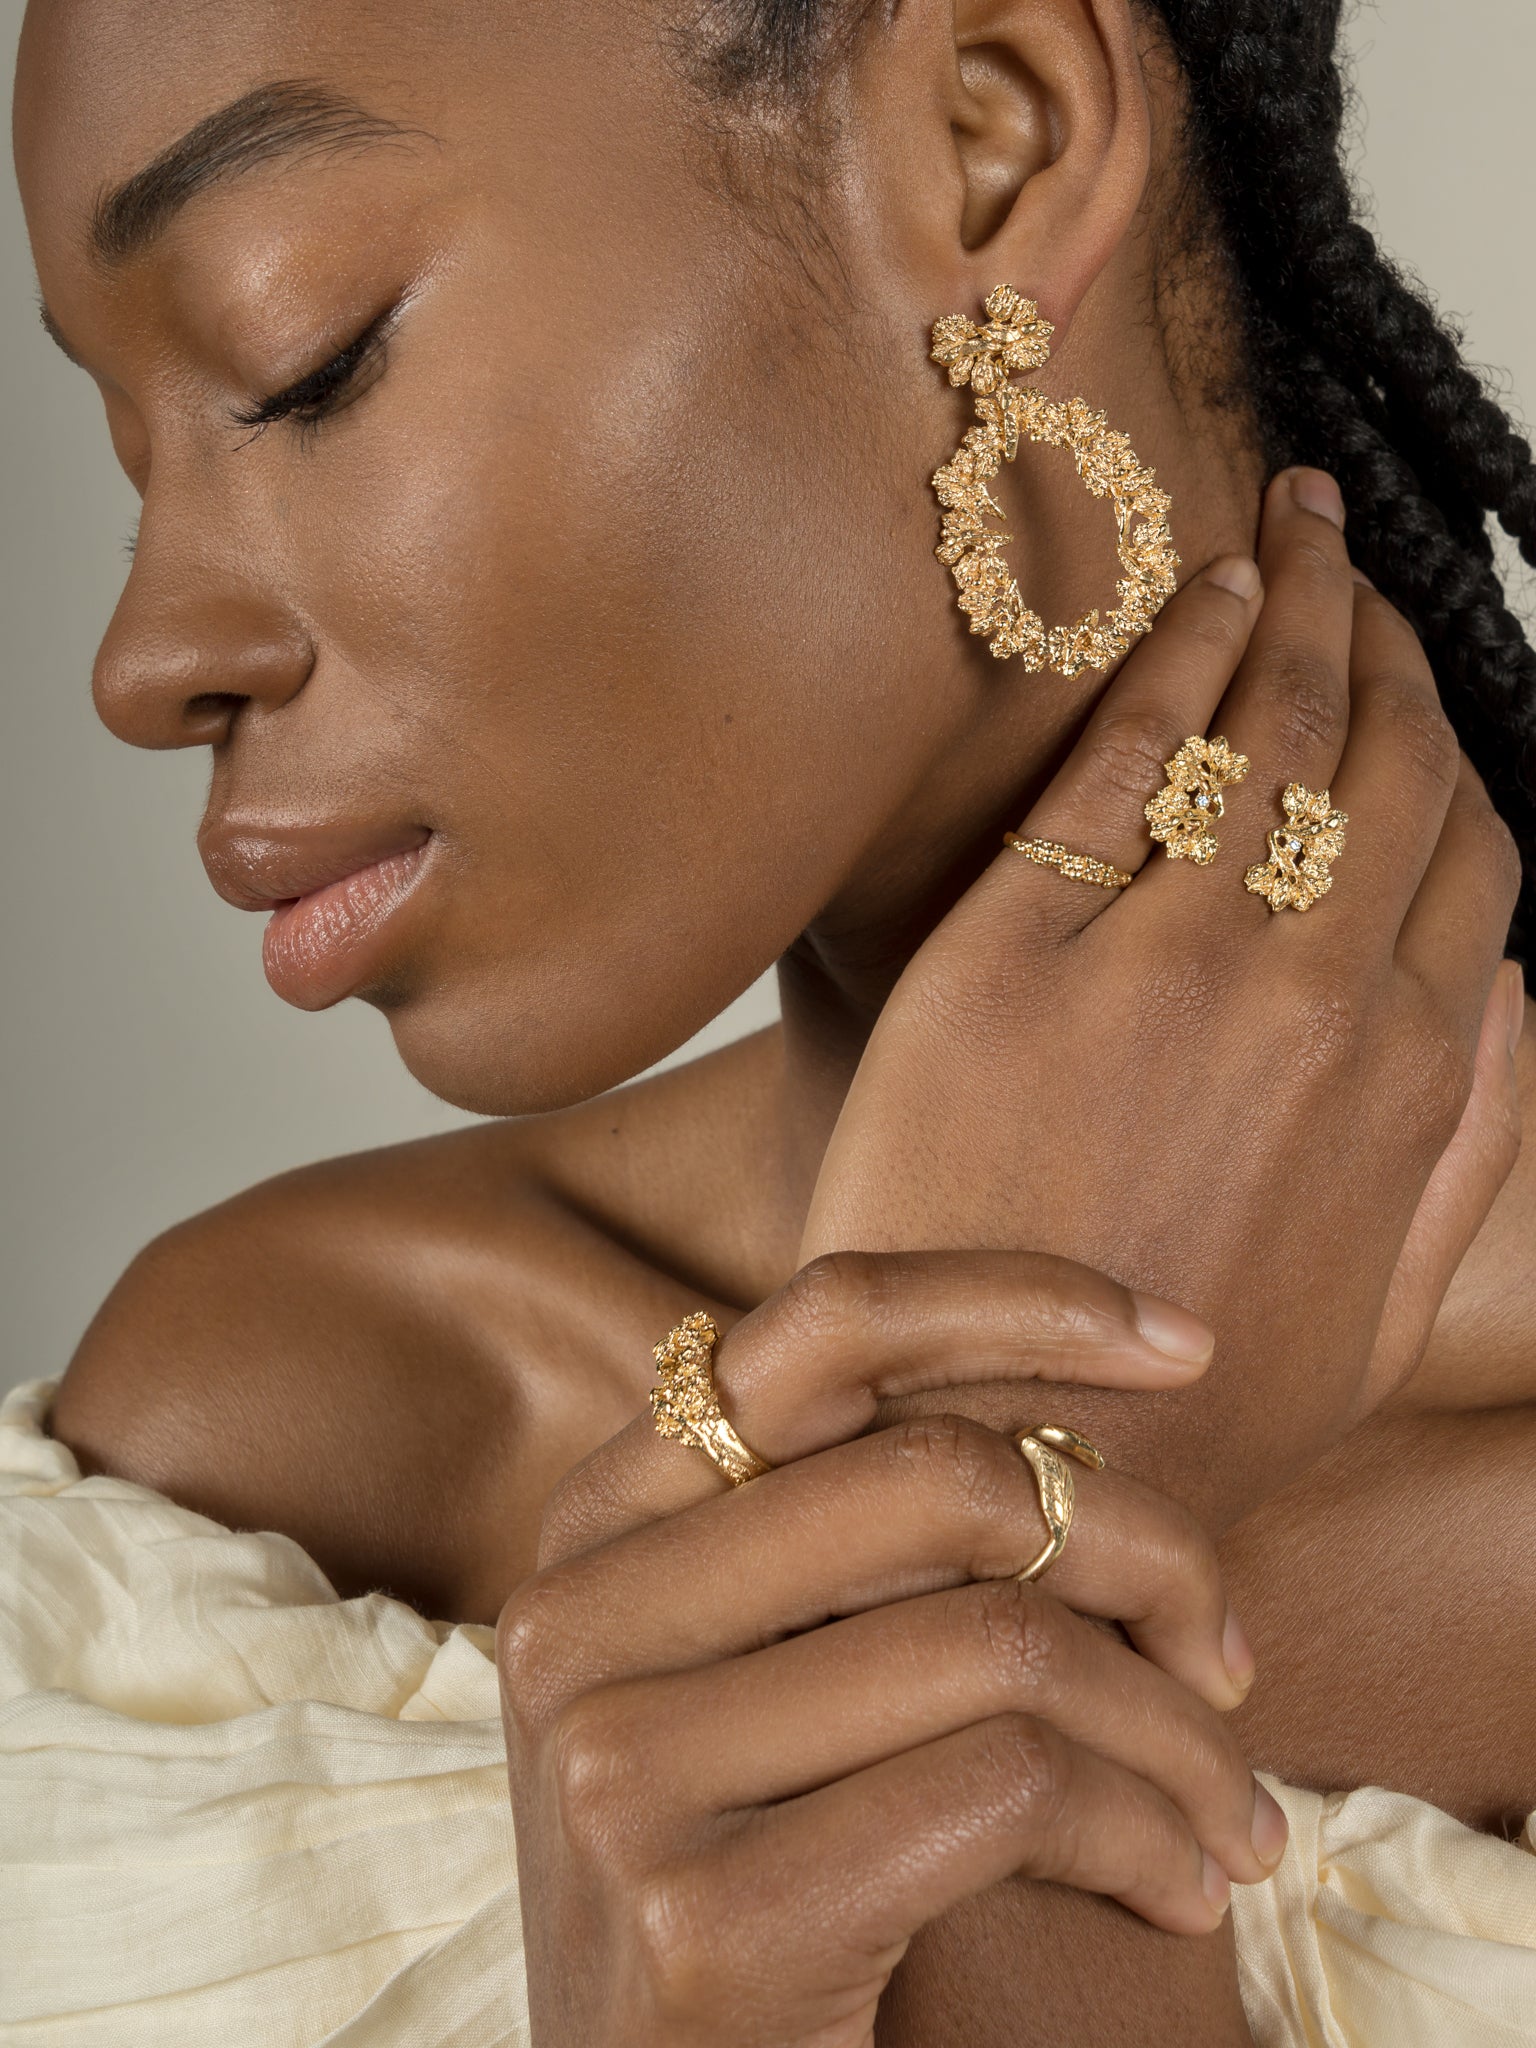 A woman showcasing her opulence with a magnificent Cremilde Bispo Jewellery earring set, The Garden's Delight II GP.